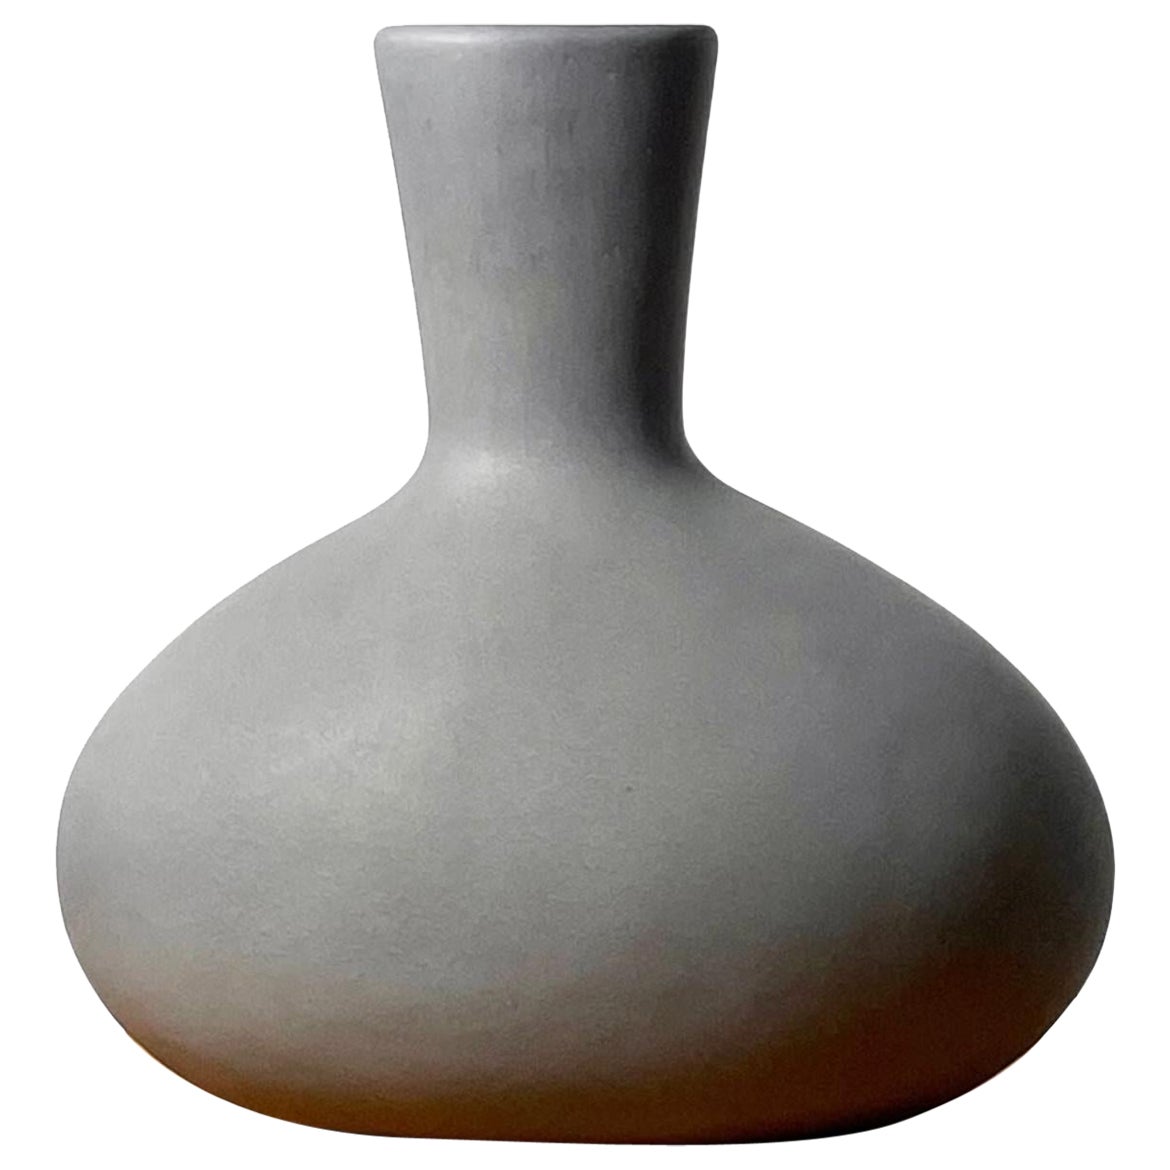 Mid Century Modern Ceramic Egg Shaped Vase by Malcolm Leland circa 1950s For Sale